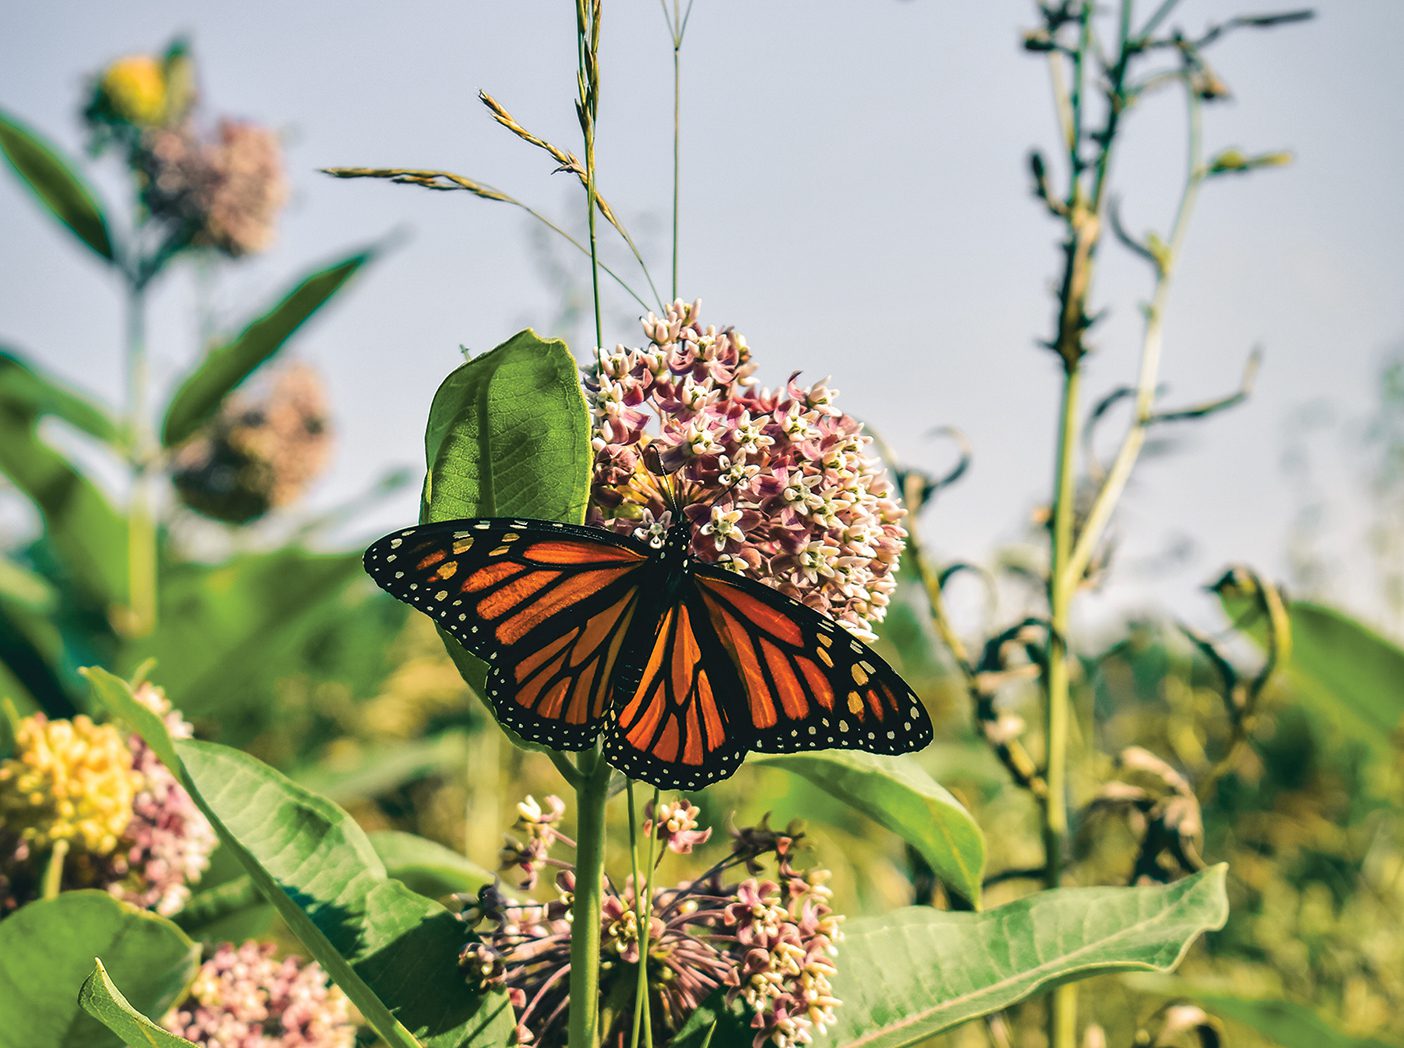 A Monarch butterfly sitting on a flower.